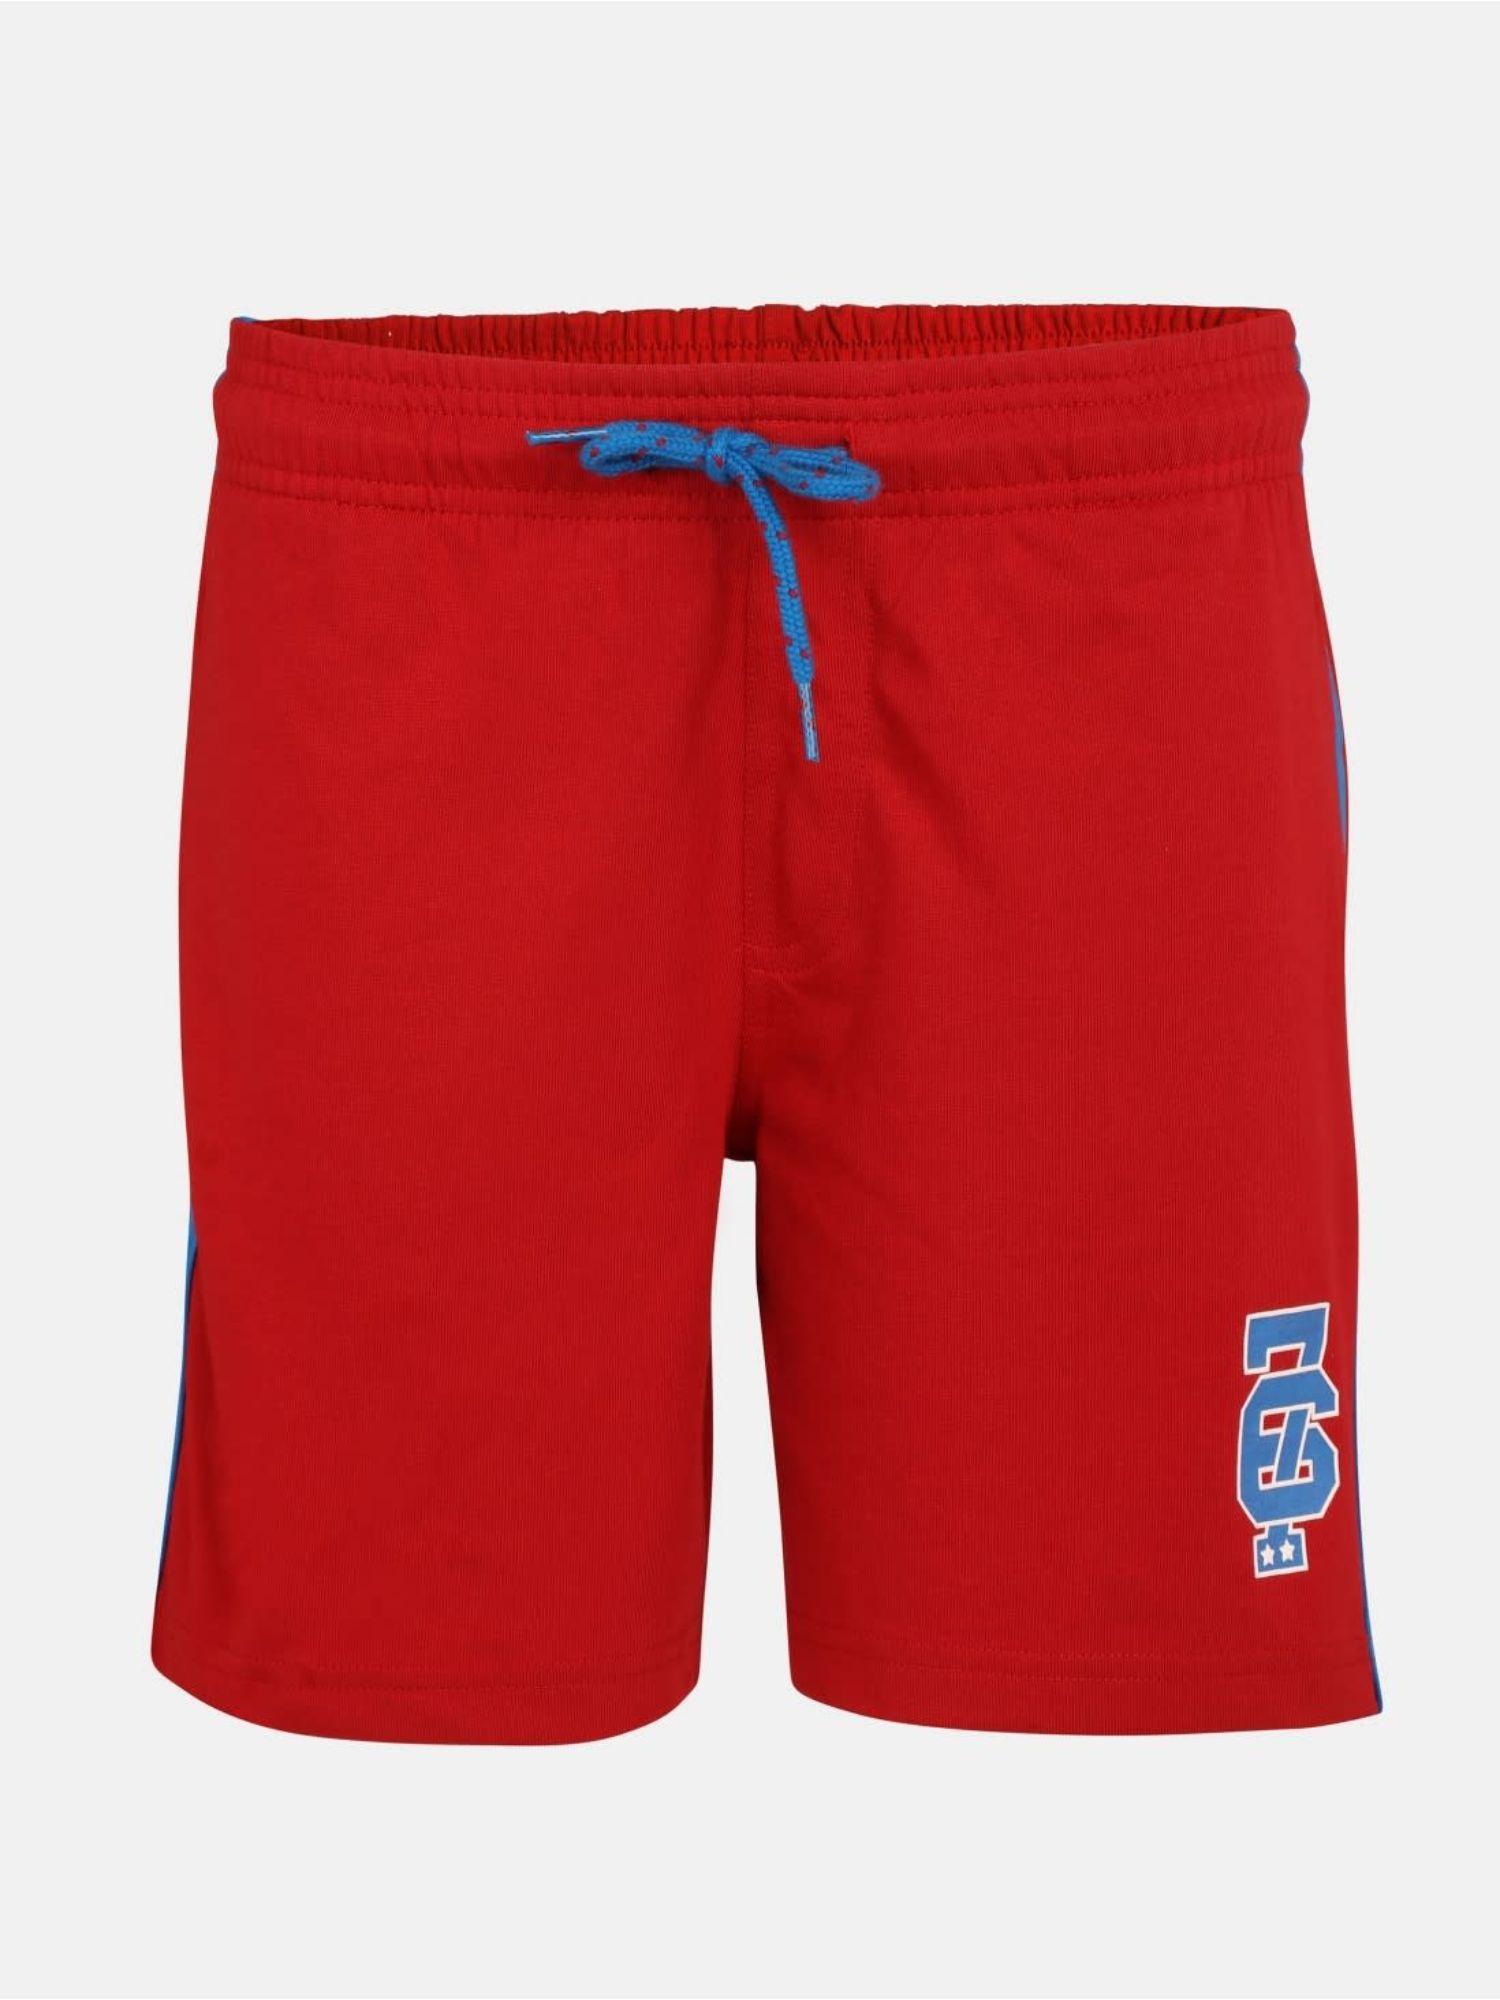 shanghai red boys shorts - style number - (ab11)